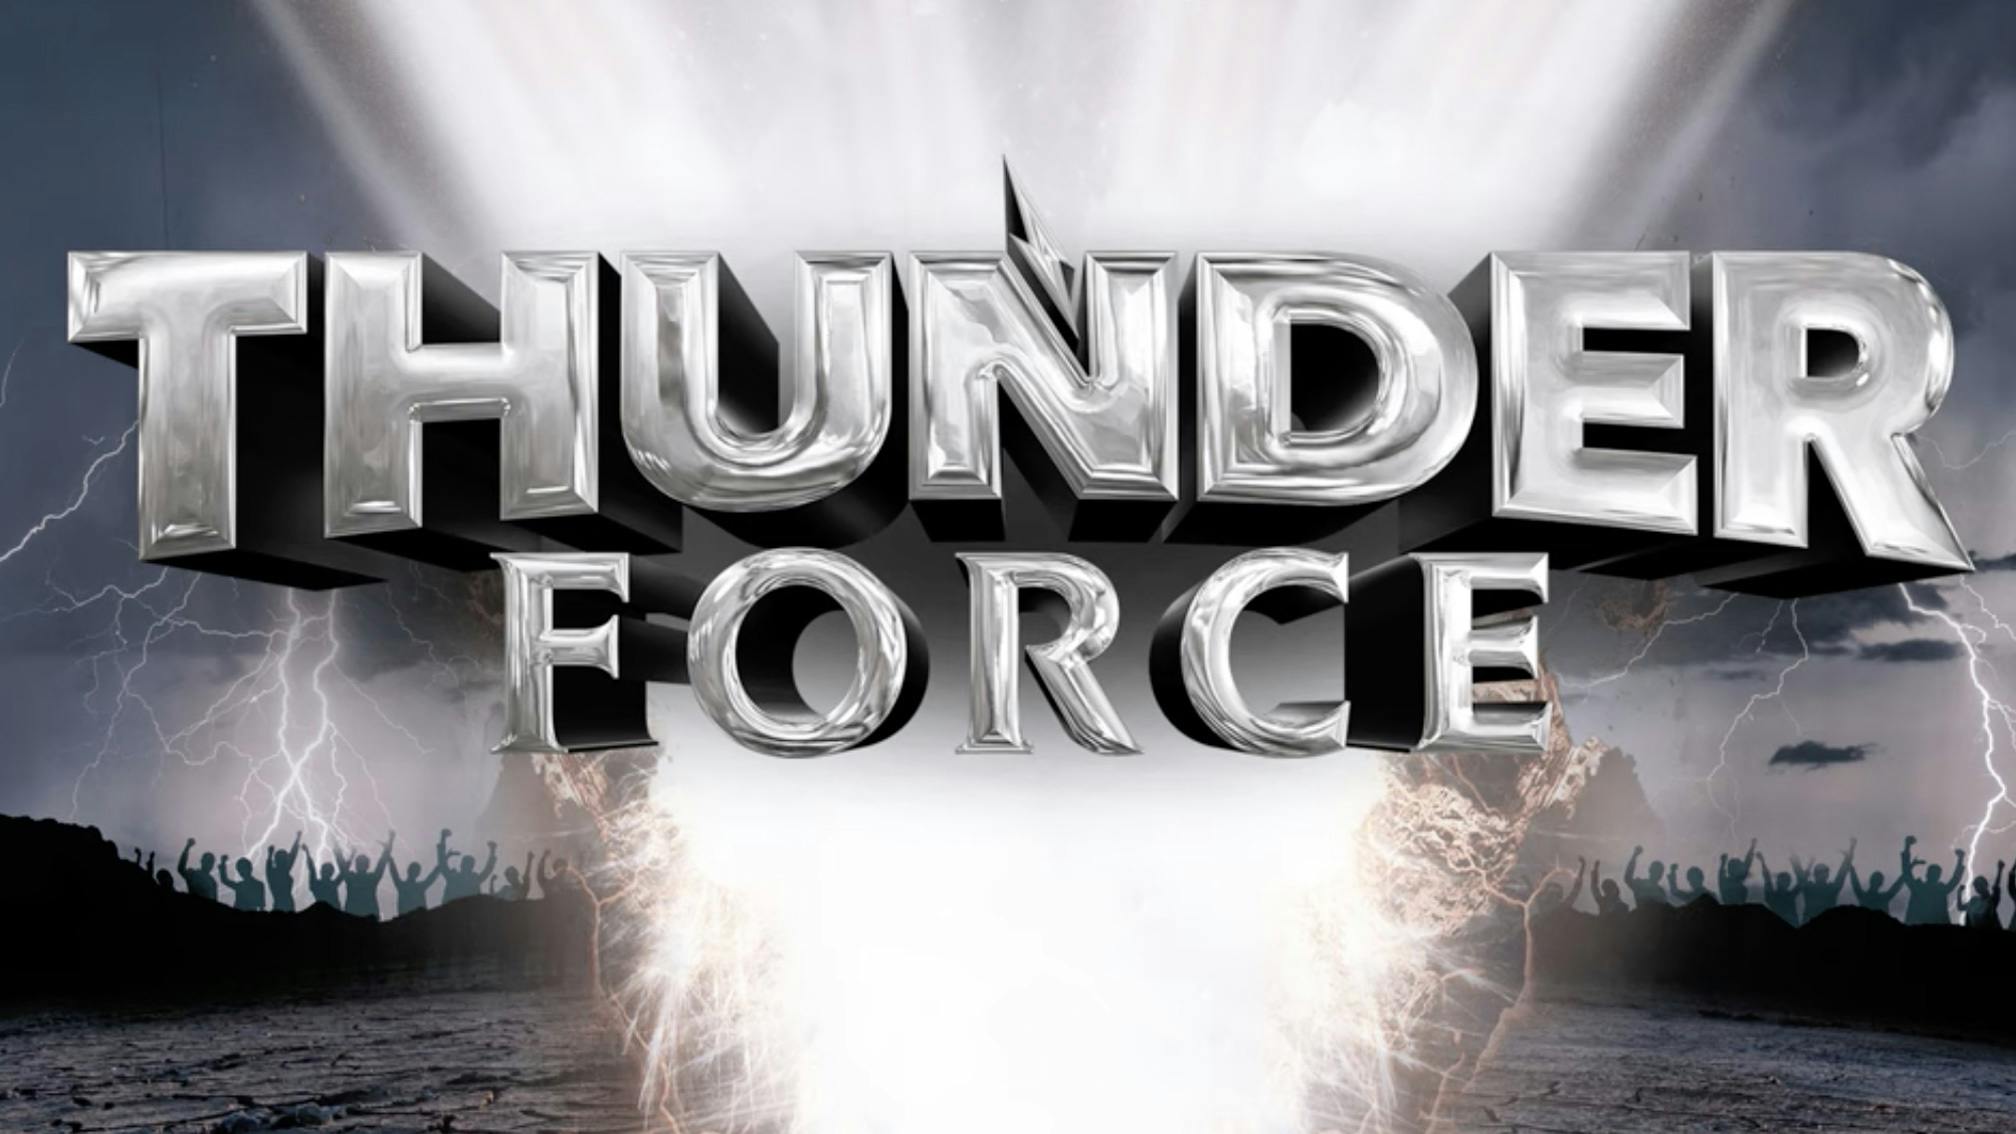 Corey Taylor, Lzzy Hale, Scott Ian and more unite on new song Thunder Force